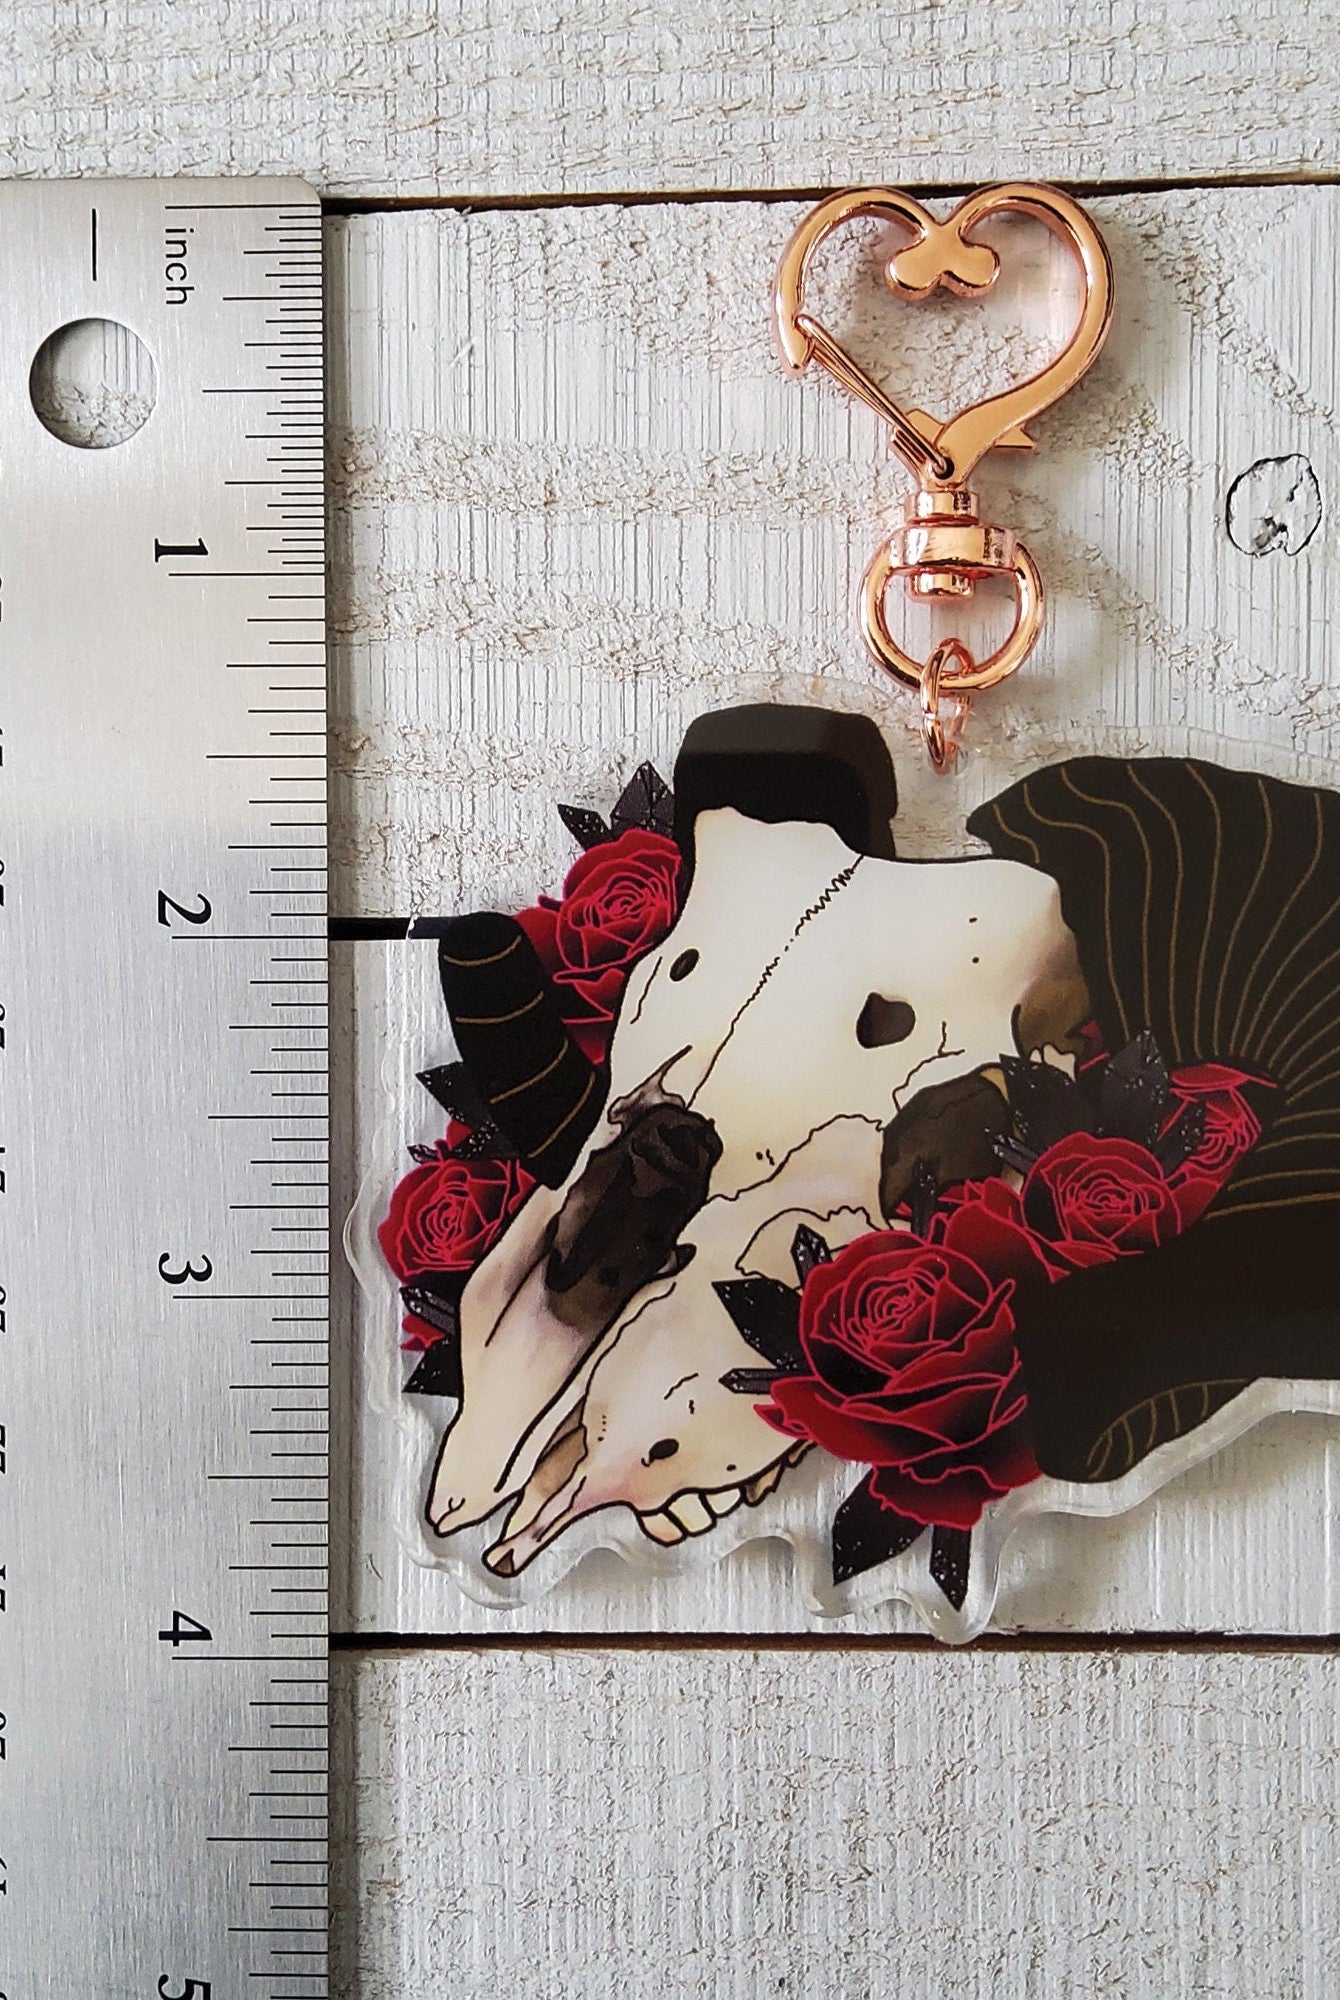 ACRYLIC CHARM Double Sided: Ram Skull and Roses , Ram Skull Charm , Skull Charm , Skull and Roses Charm , Ram Skull Charm , Goth Charm